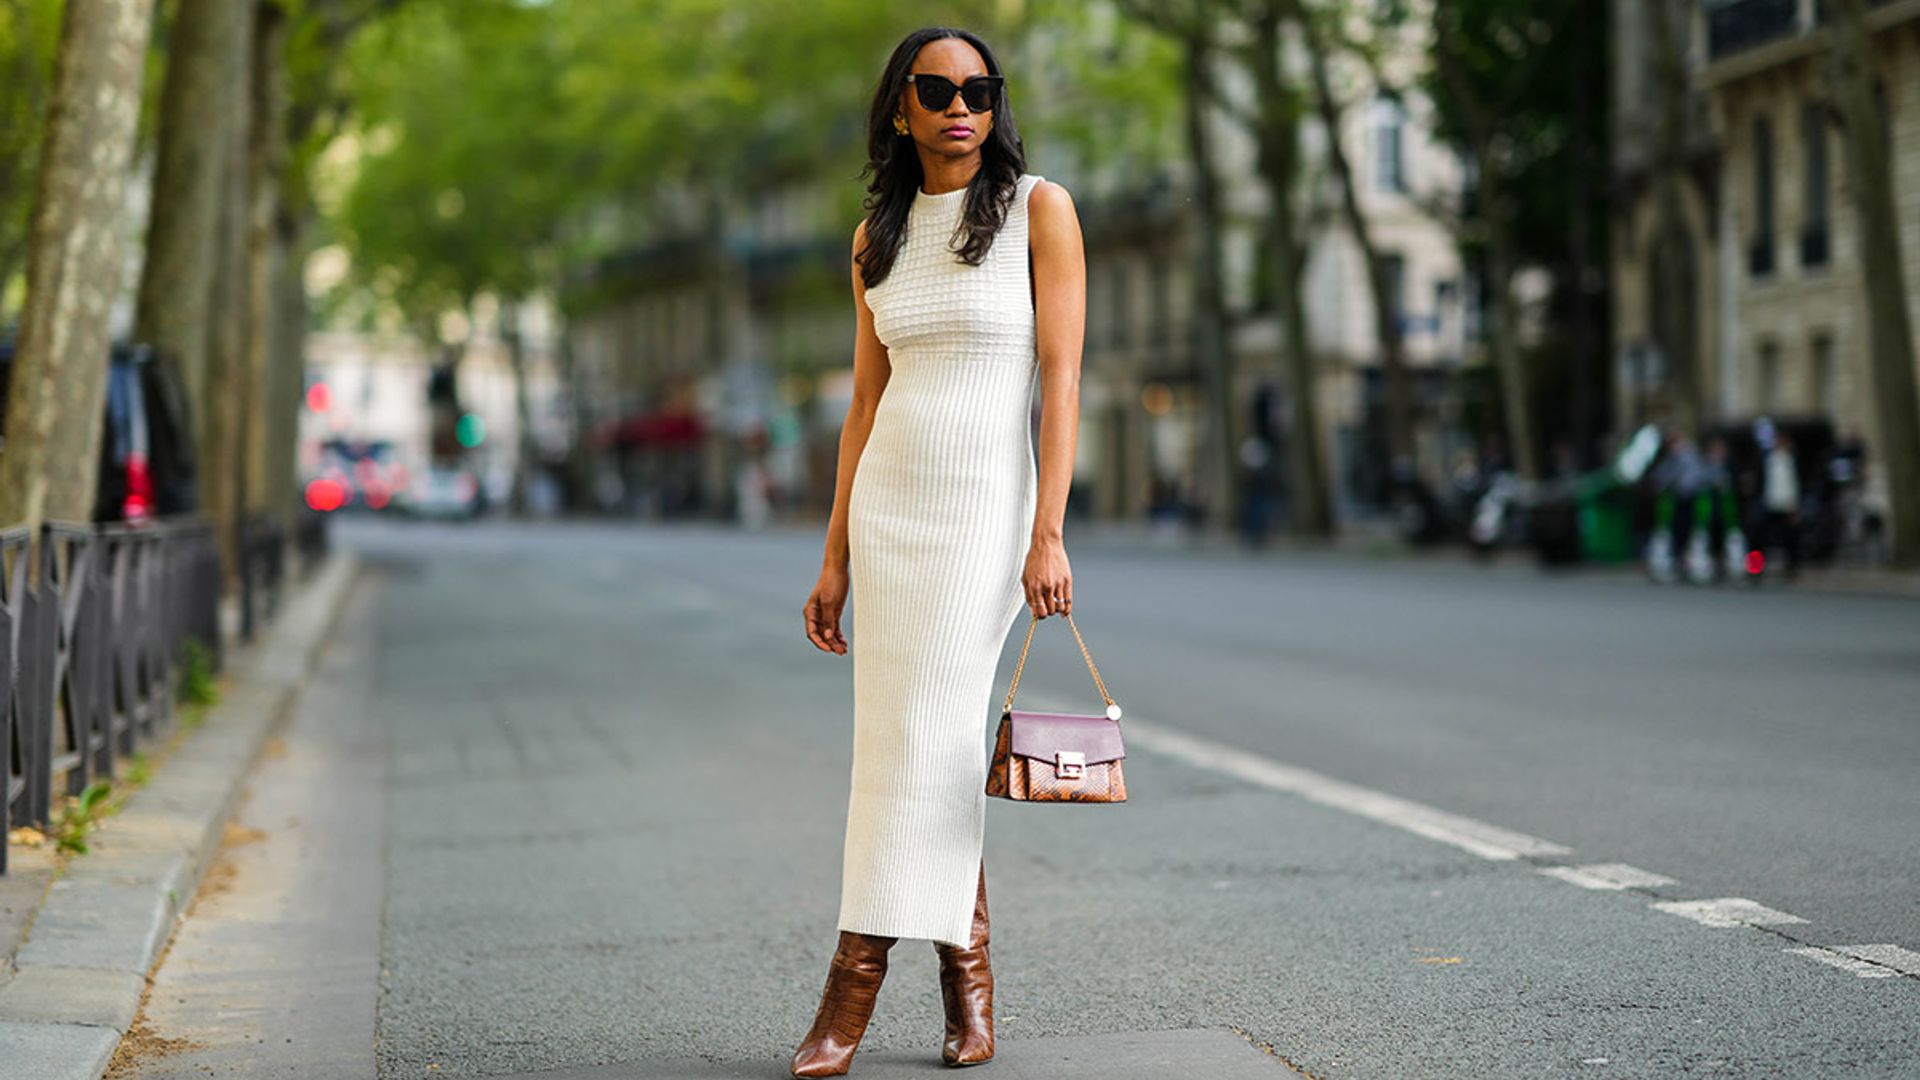 Tank top dresses are the understated summer trend you need in your 2023  wardrobe